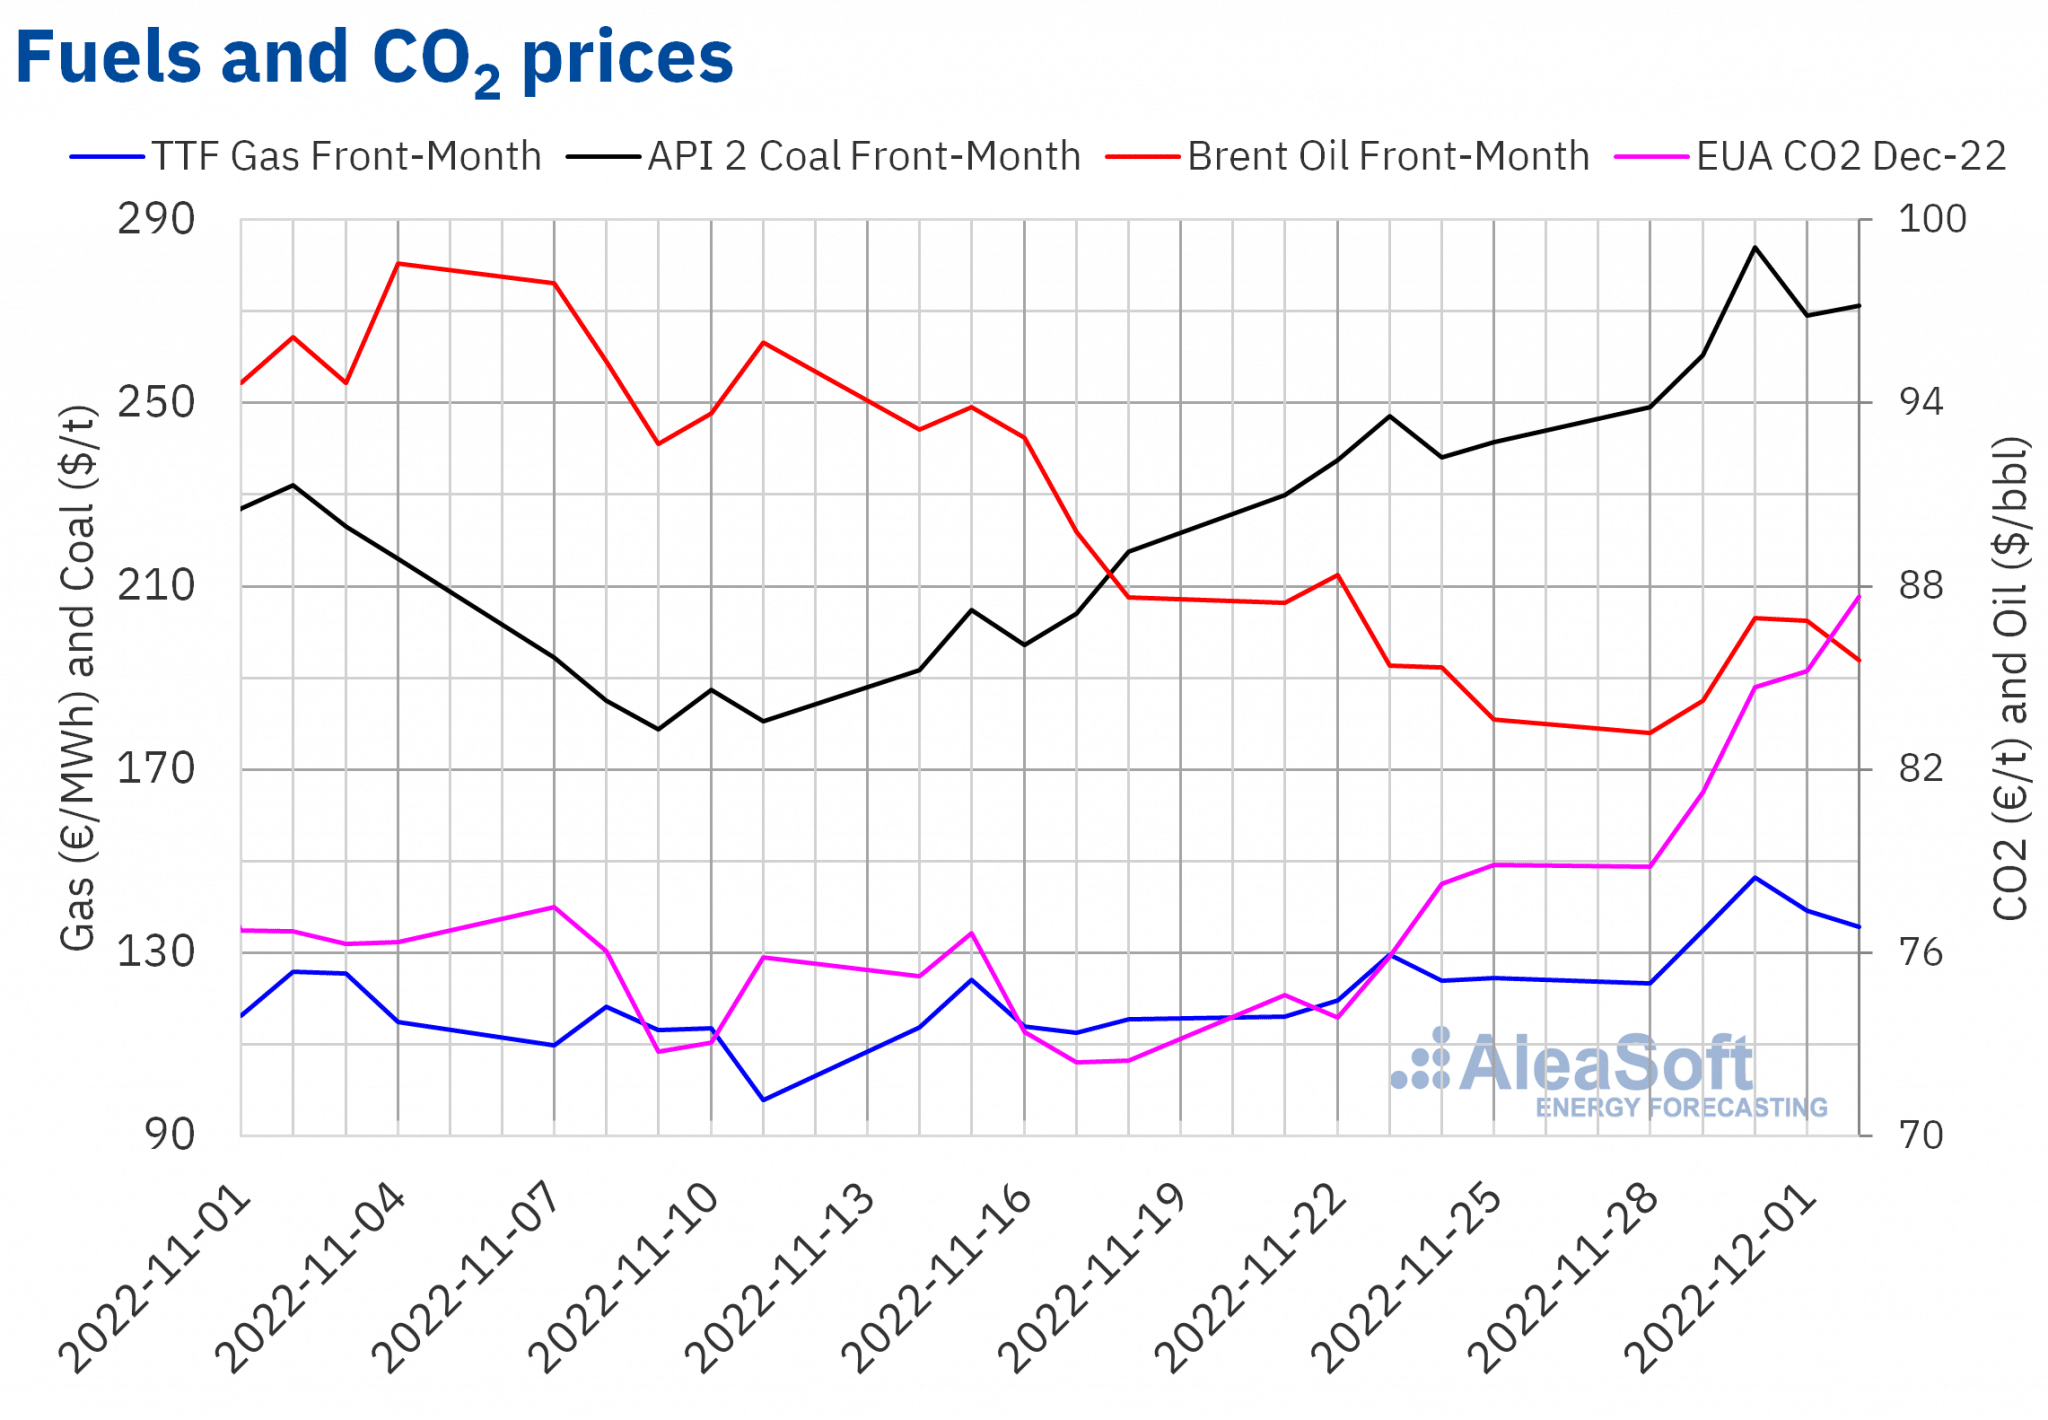 AleaSoft - Prices gas coal Brent oil CO2